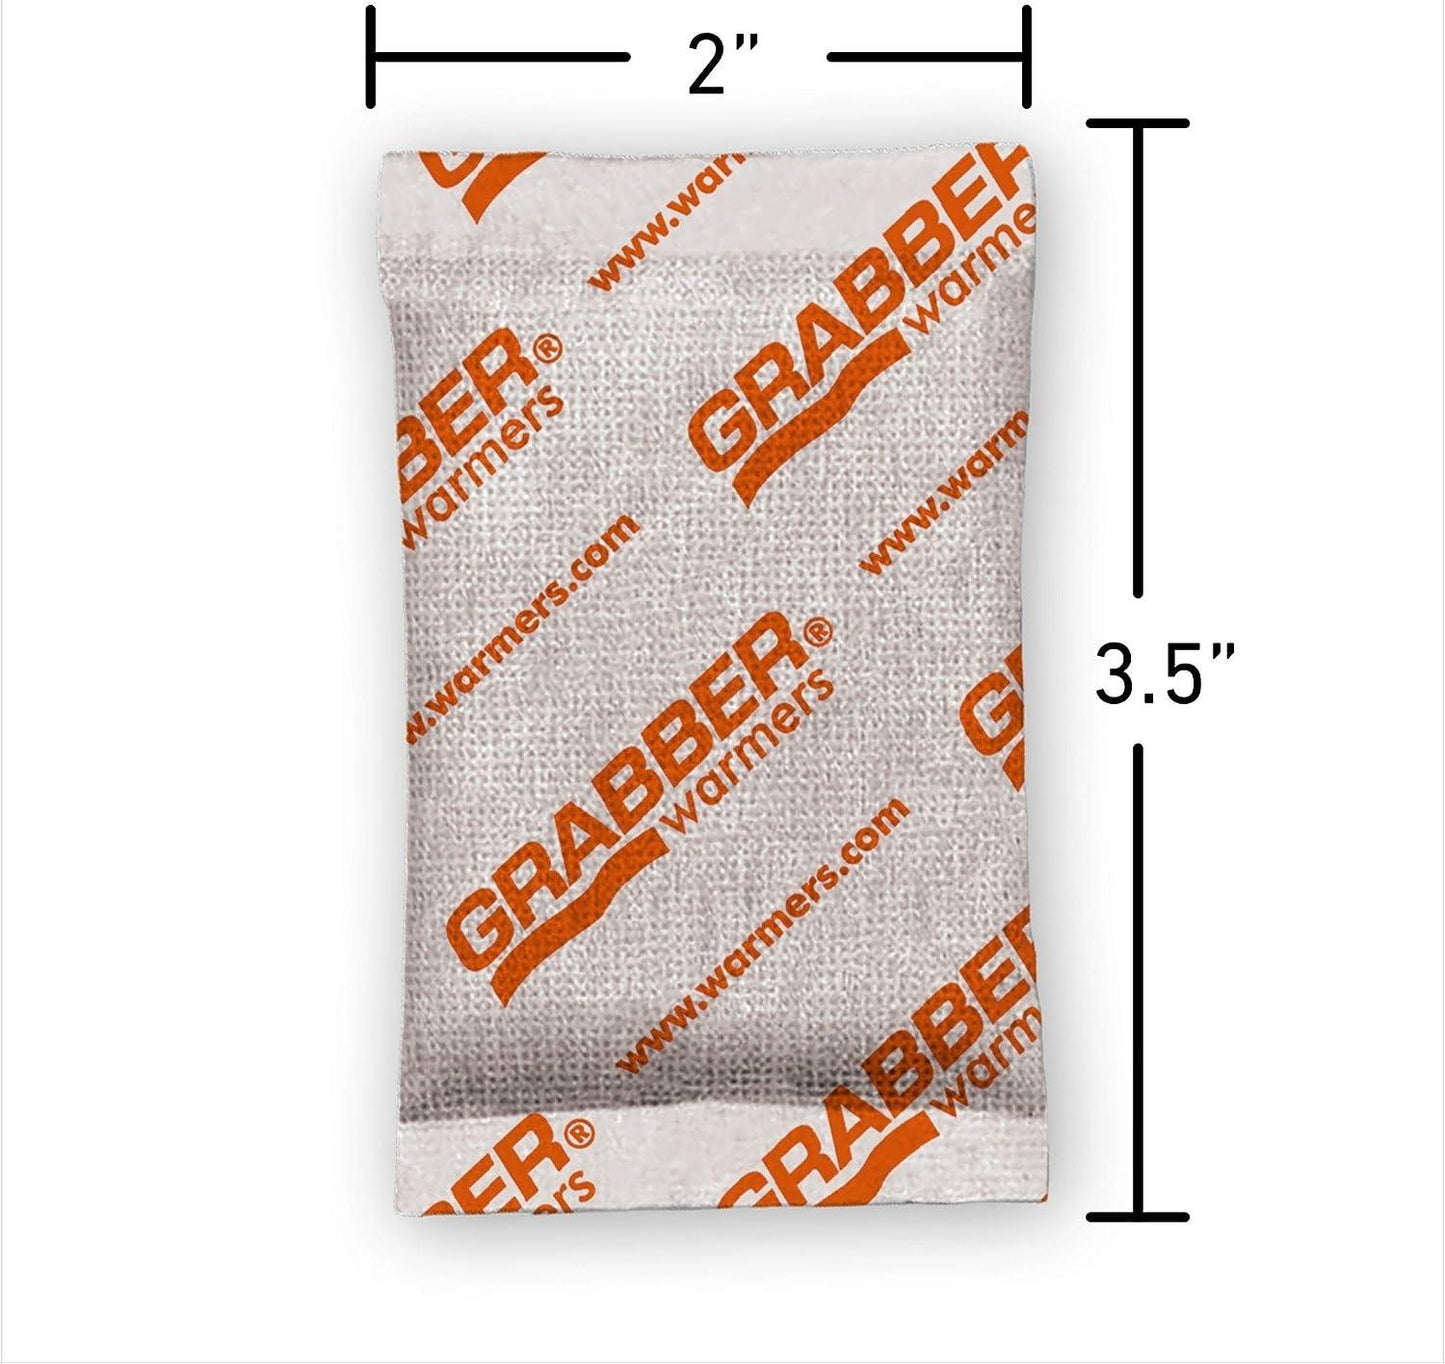 Grabber Hand Warmers - Long Lasting Safe Natural Odorless Air Activated Warmers - Up to 10 Hours of Heat - 10 Pair Pack